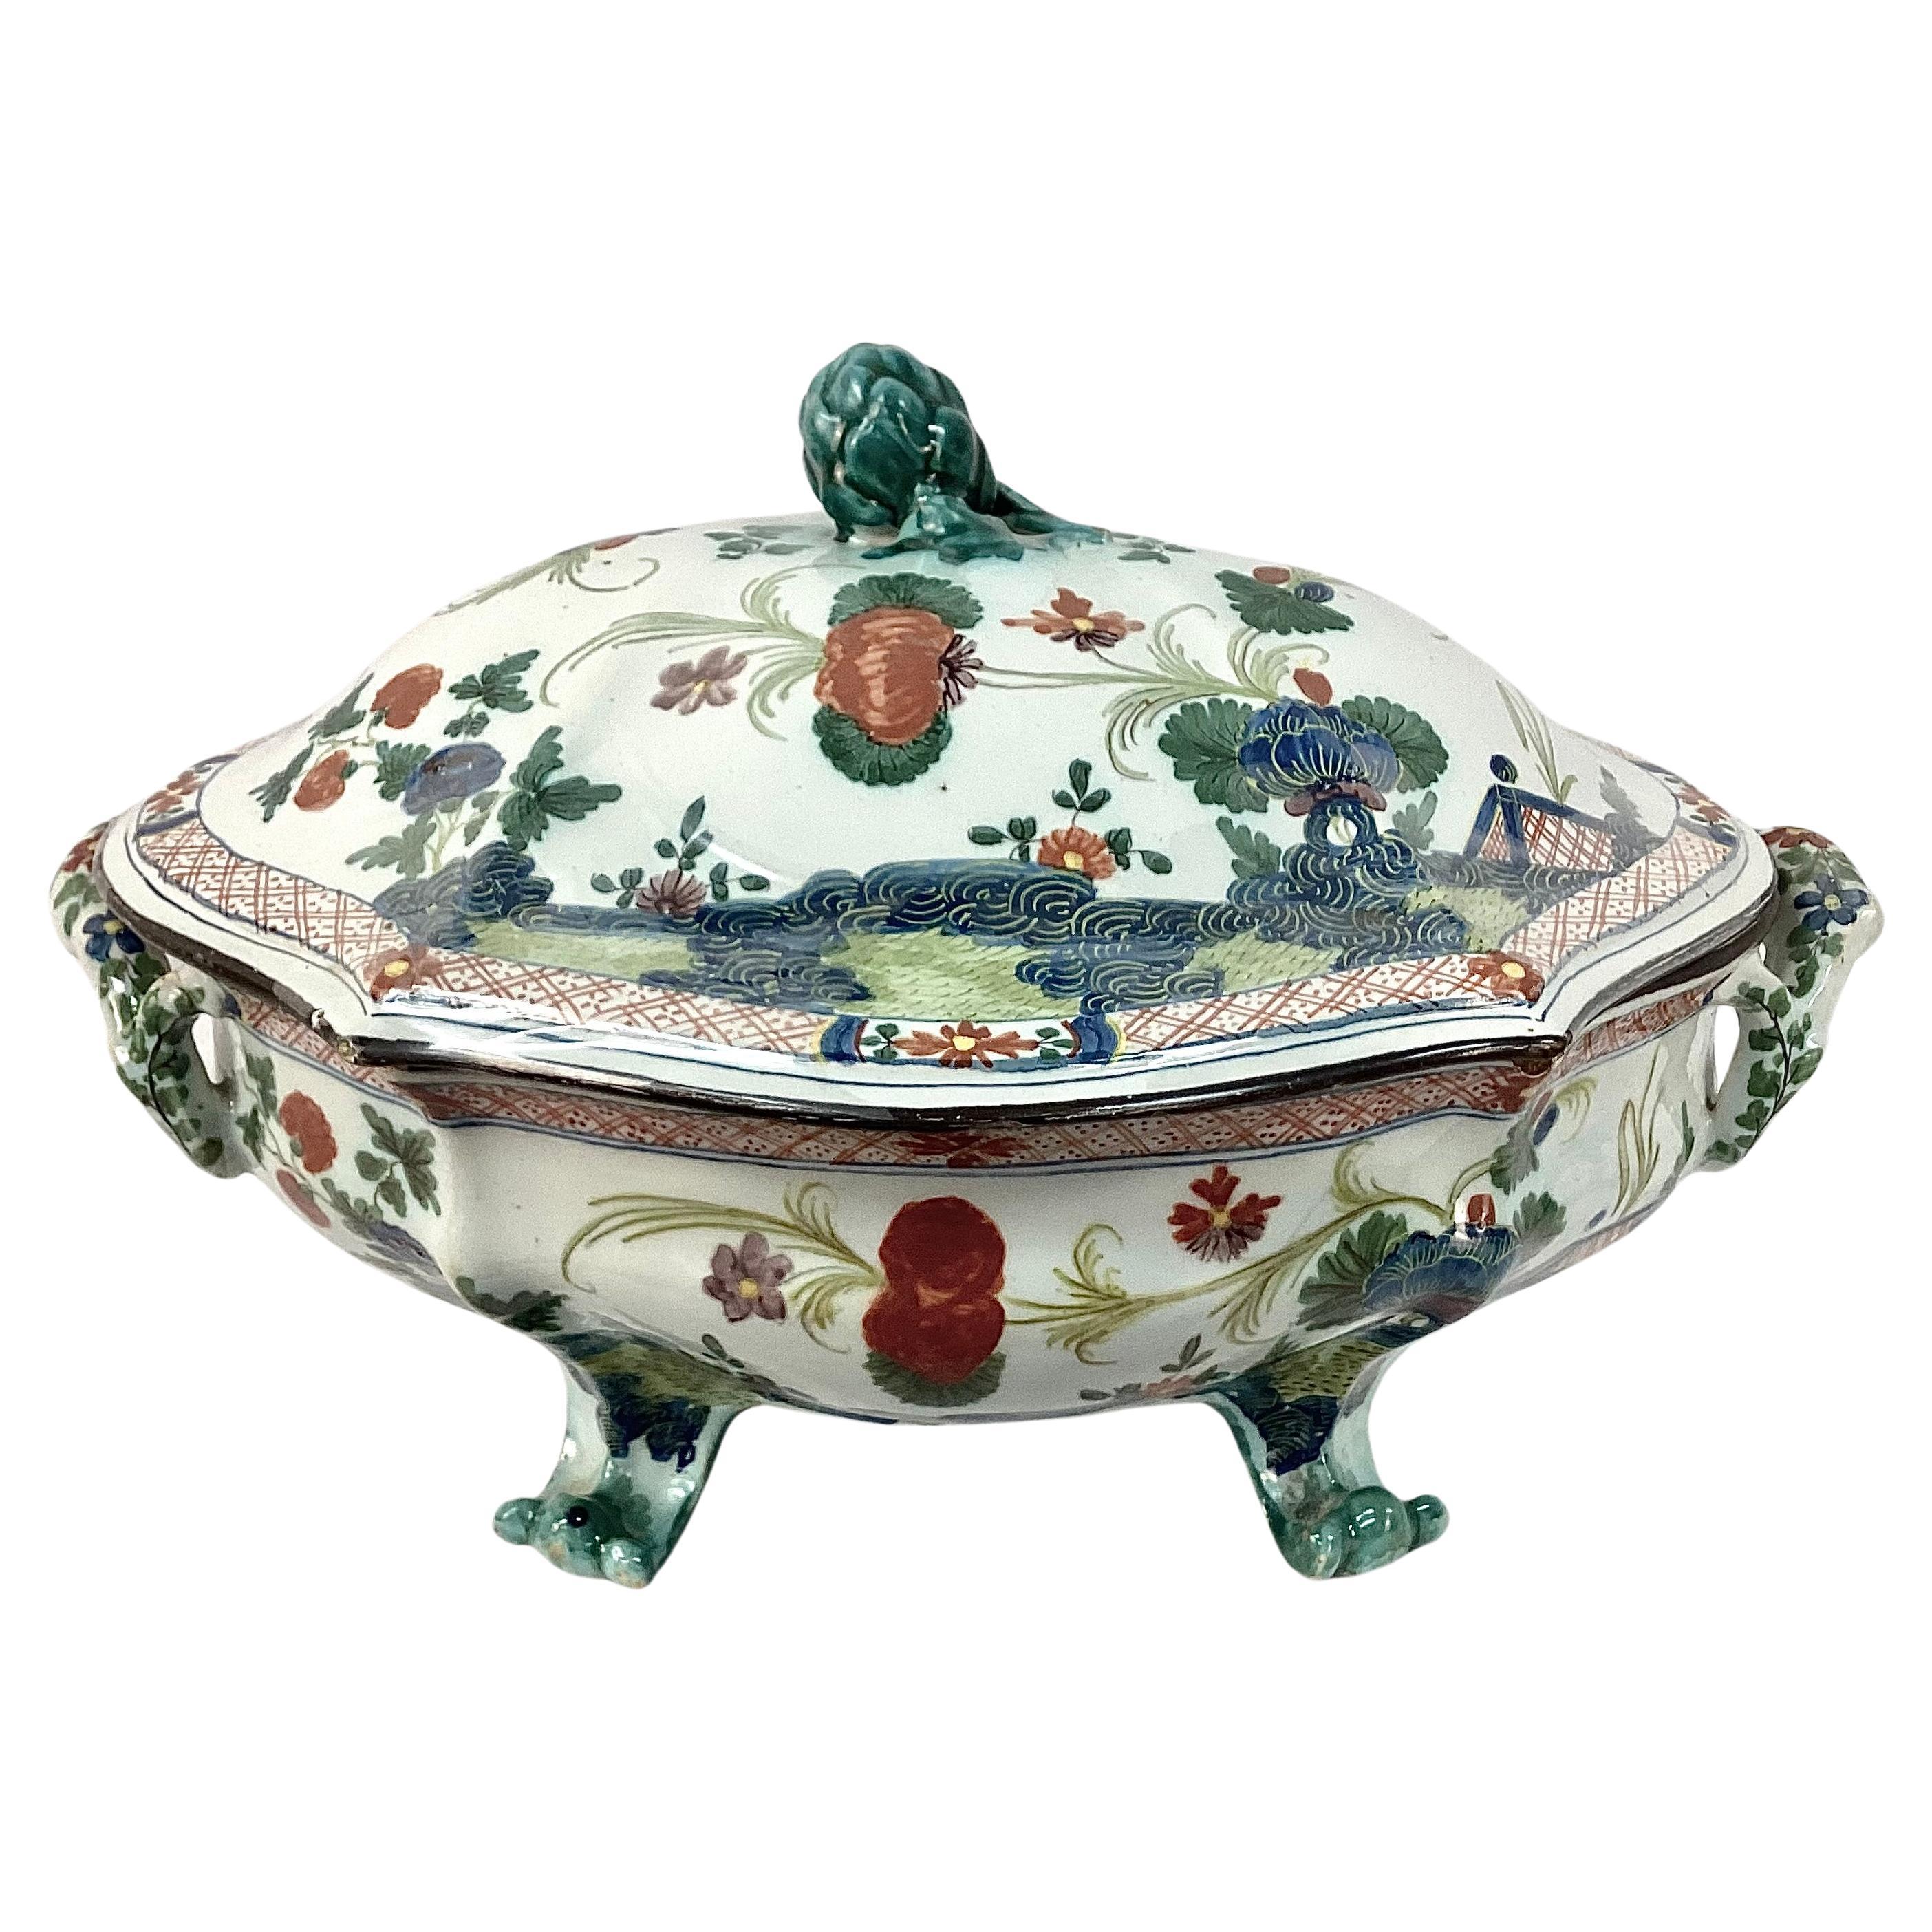 Early 19th century Italian Faenza Garofano tureen with lid and handles.  Porcelain covered dish with artichoke-shaped grip. Features rich colors of green, blue and rust on a white background.  A fine and early example of Italian Faience with